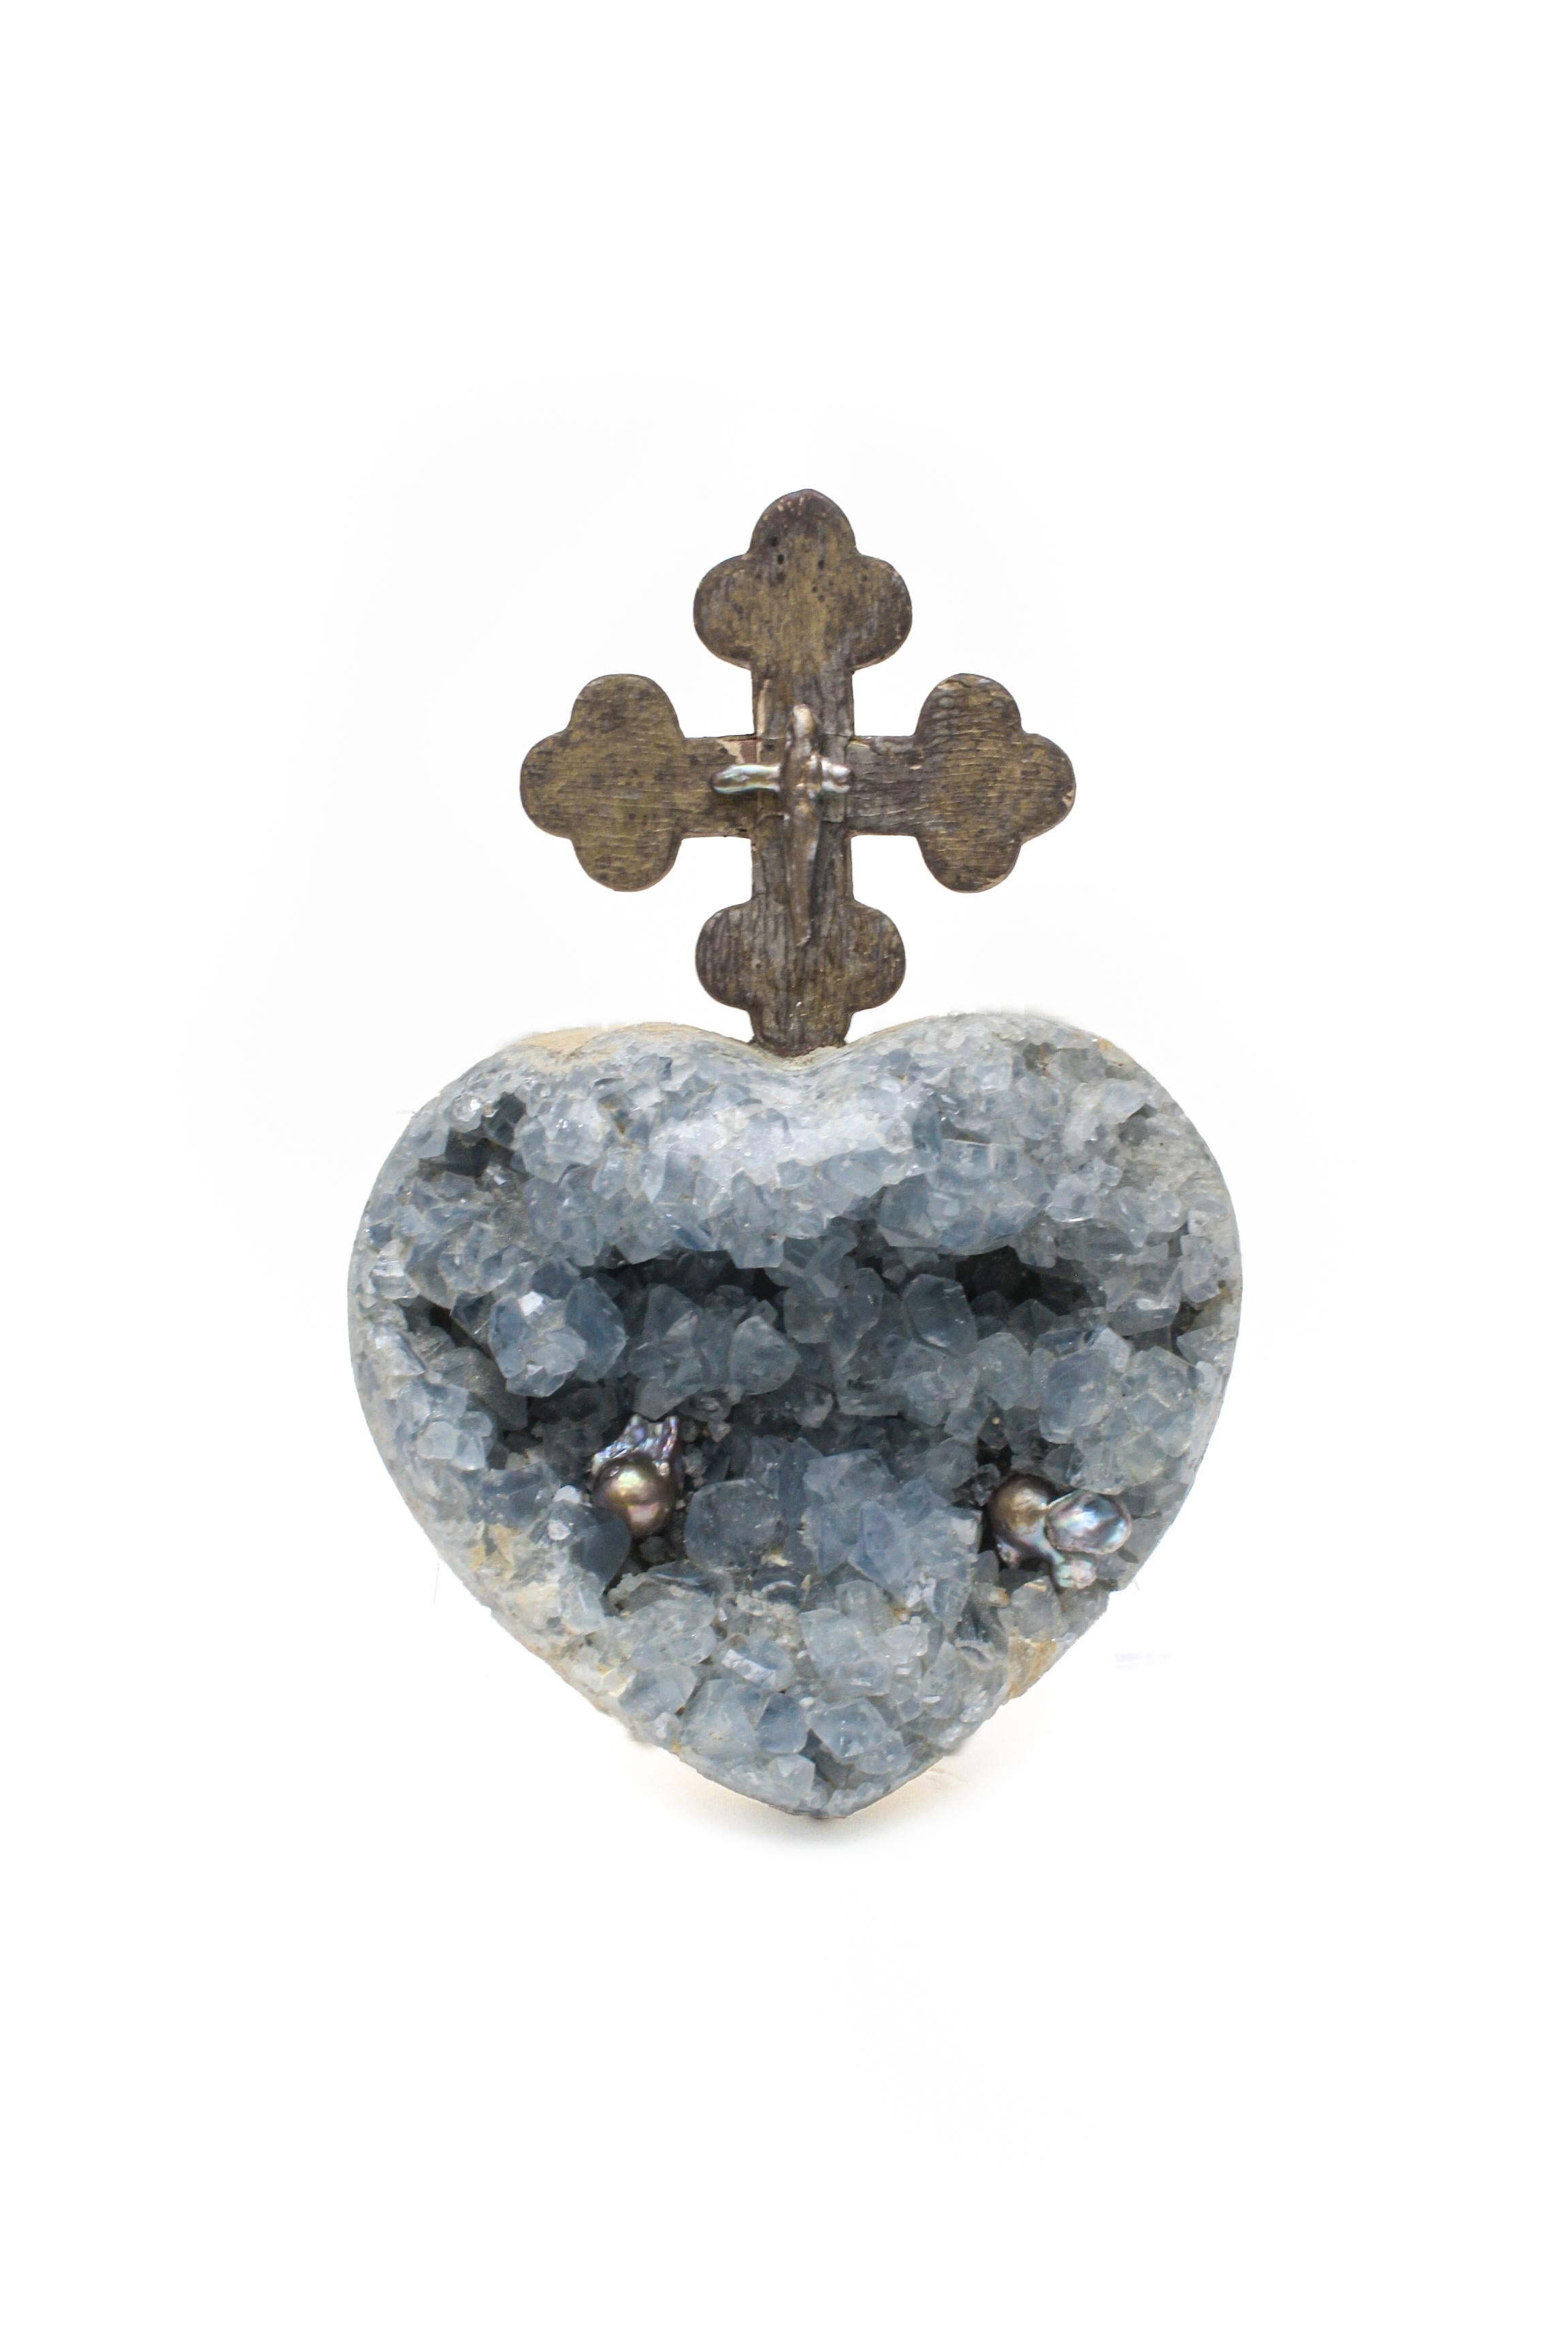 Rock Crystal 18th Century Italian Cross on a Blue Celestial Geode Heart with Baroque Pearls